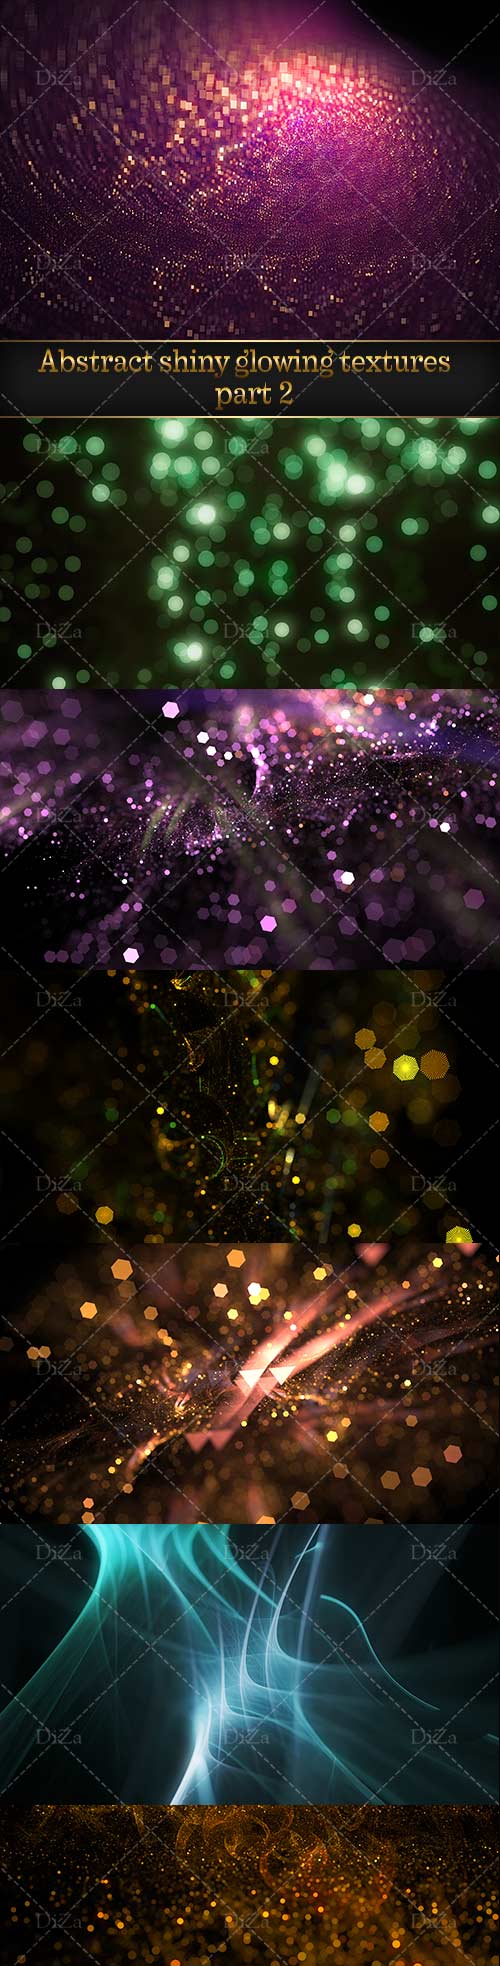 Abstract shiny glowing textures - 2